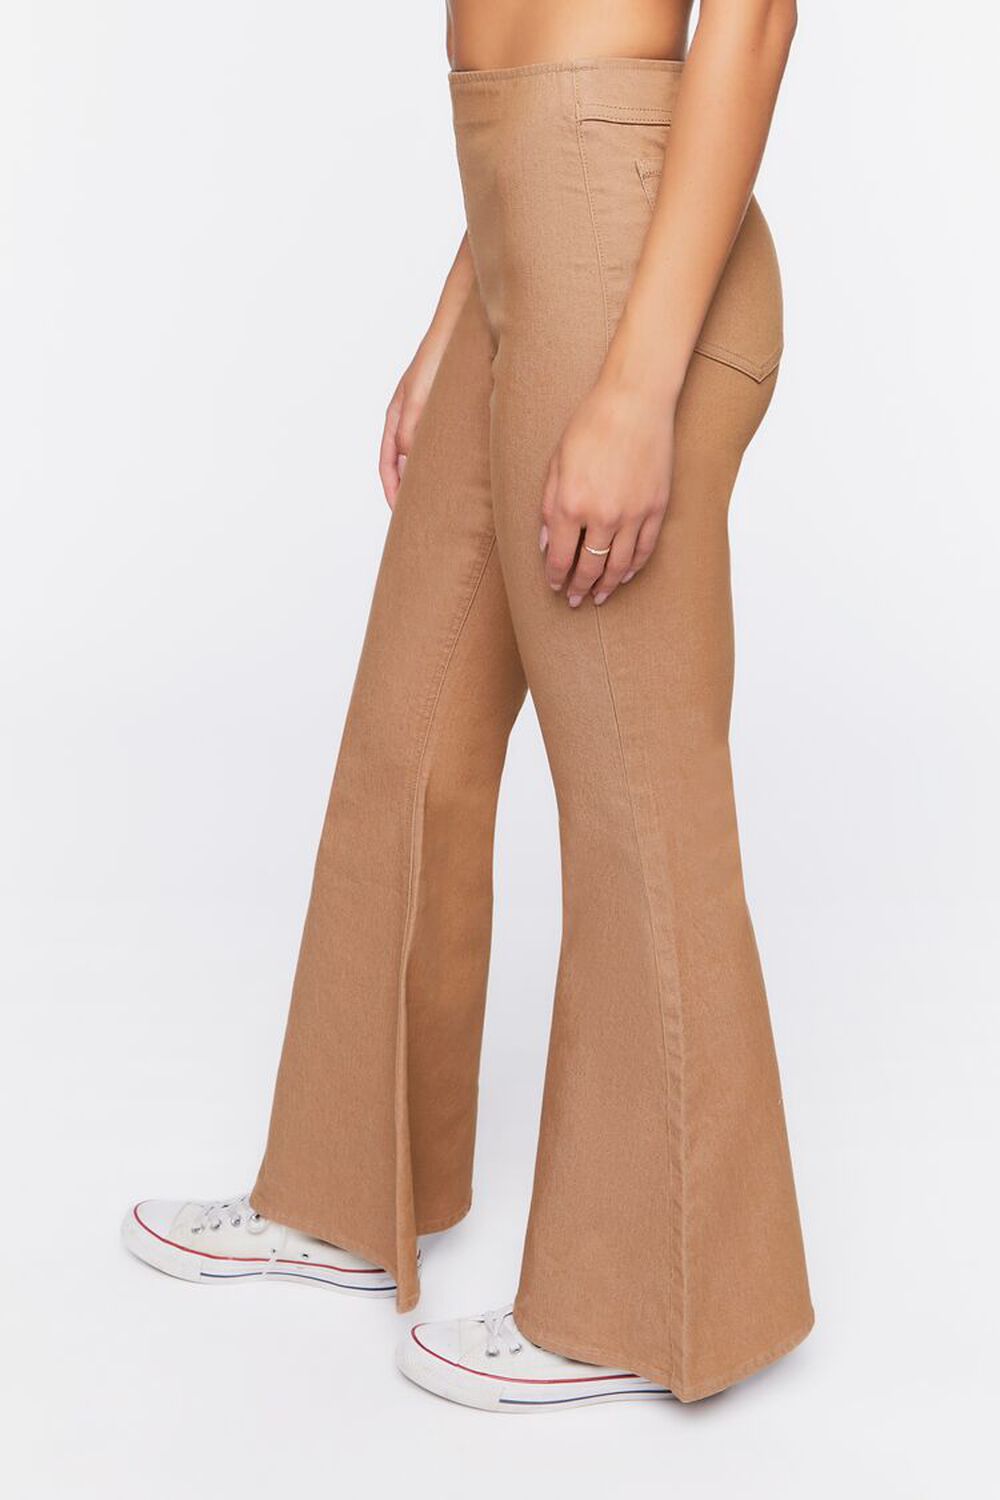 SAND Flare Mid-Rise Jeans, image 3